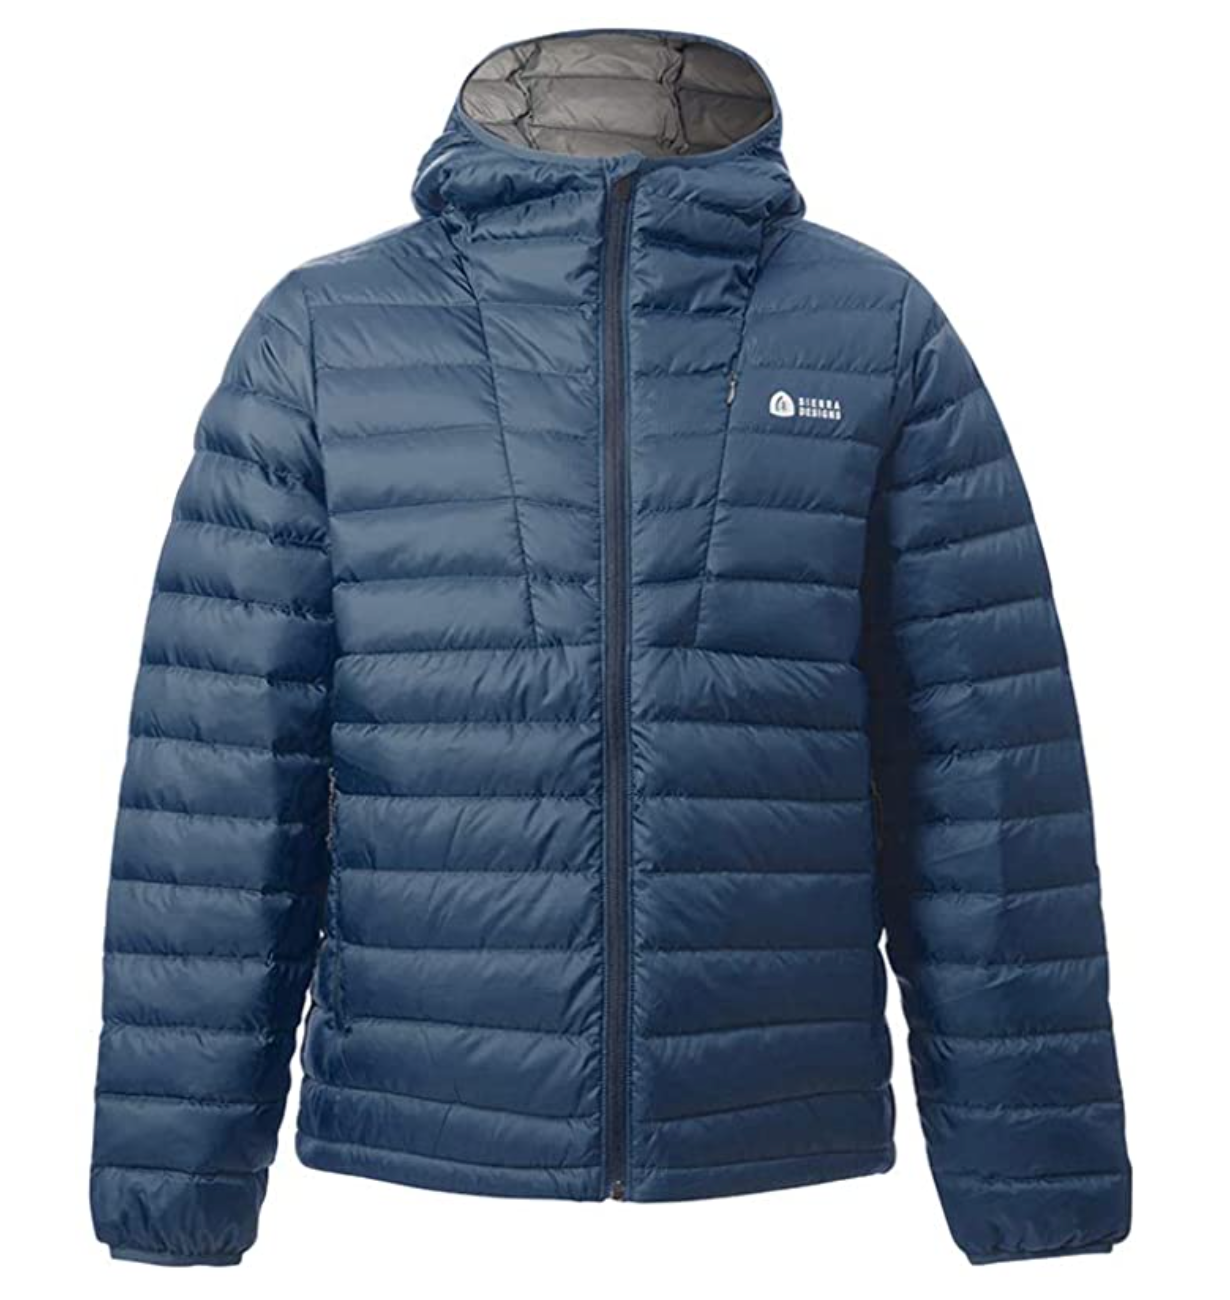 Best Down Jackets (Review & Buying Guide) in 2023 - Task & Purpose